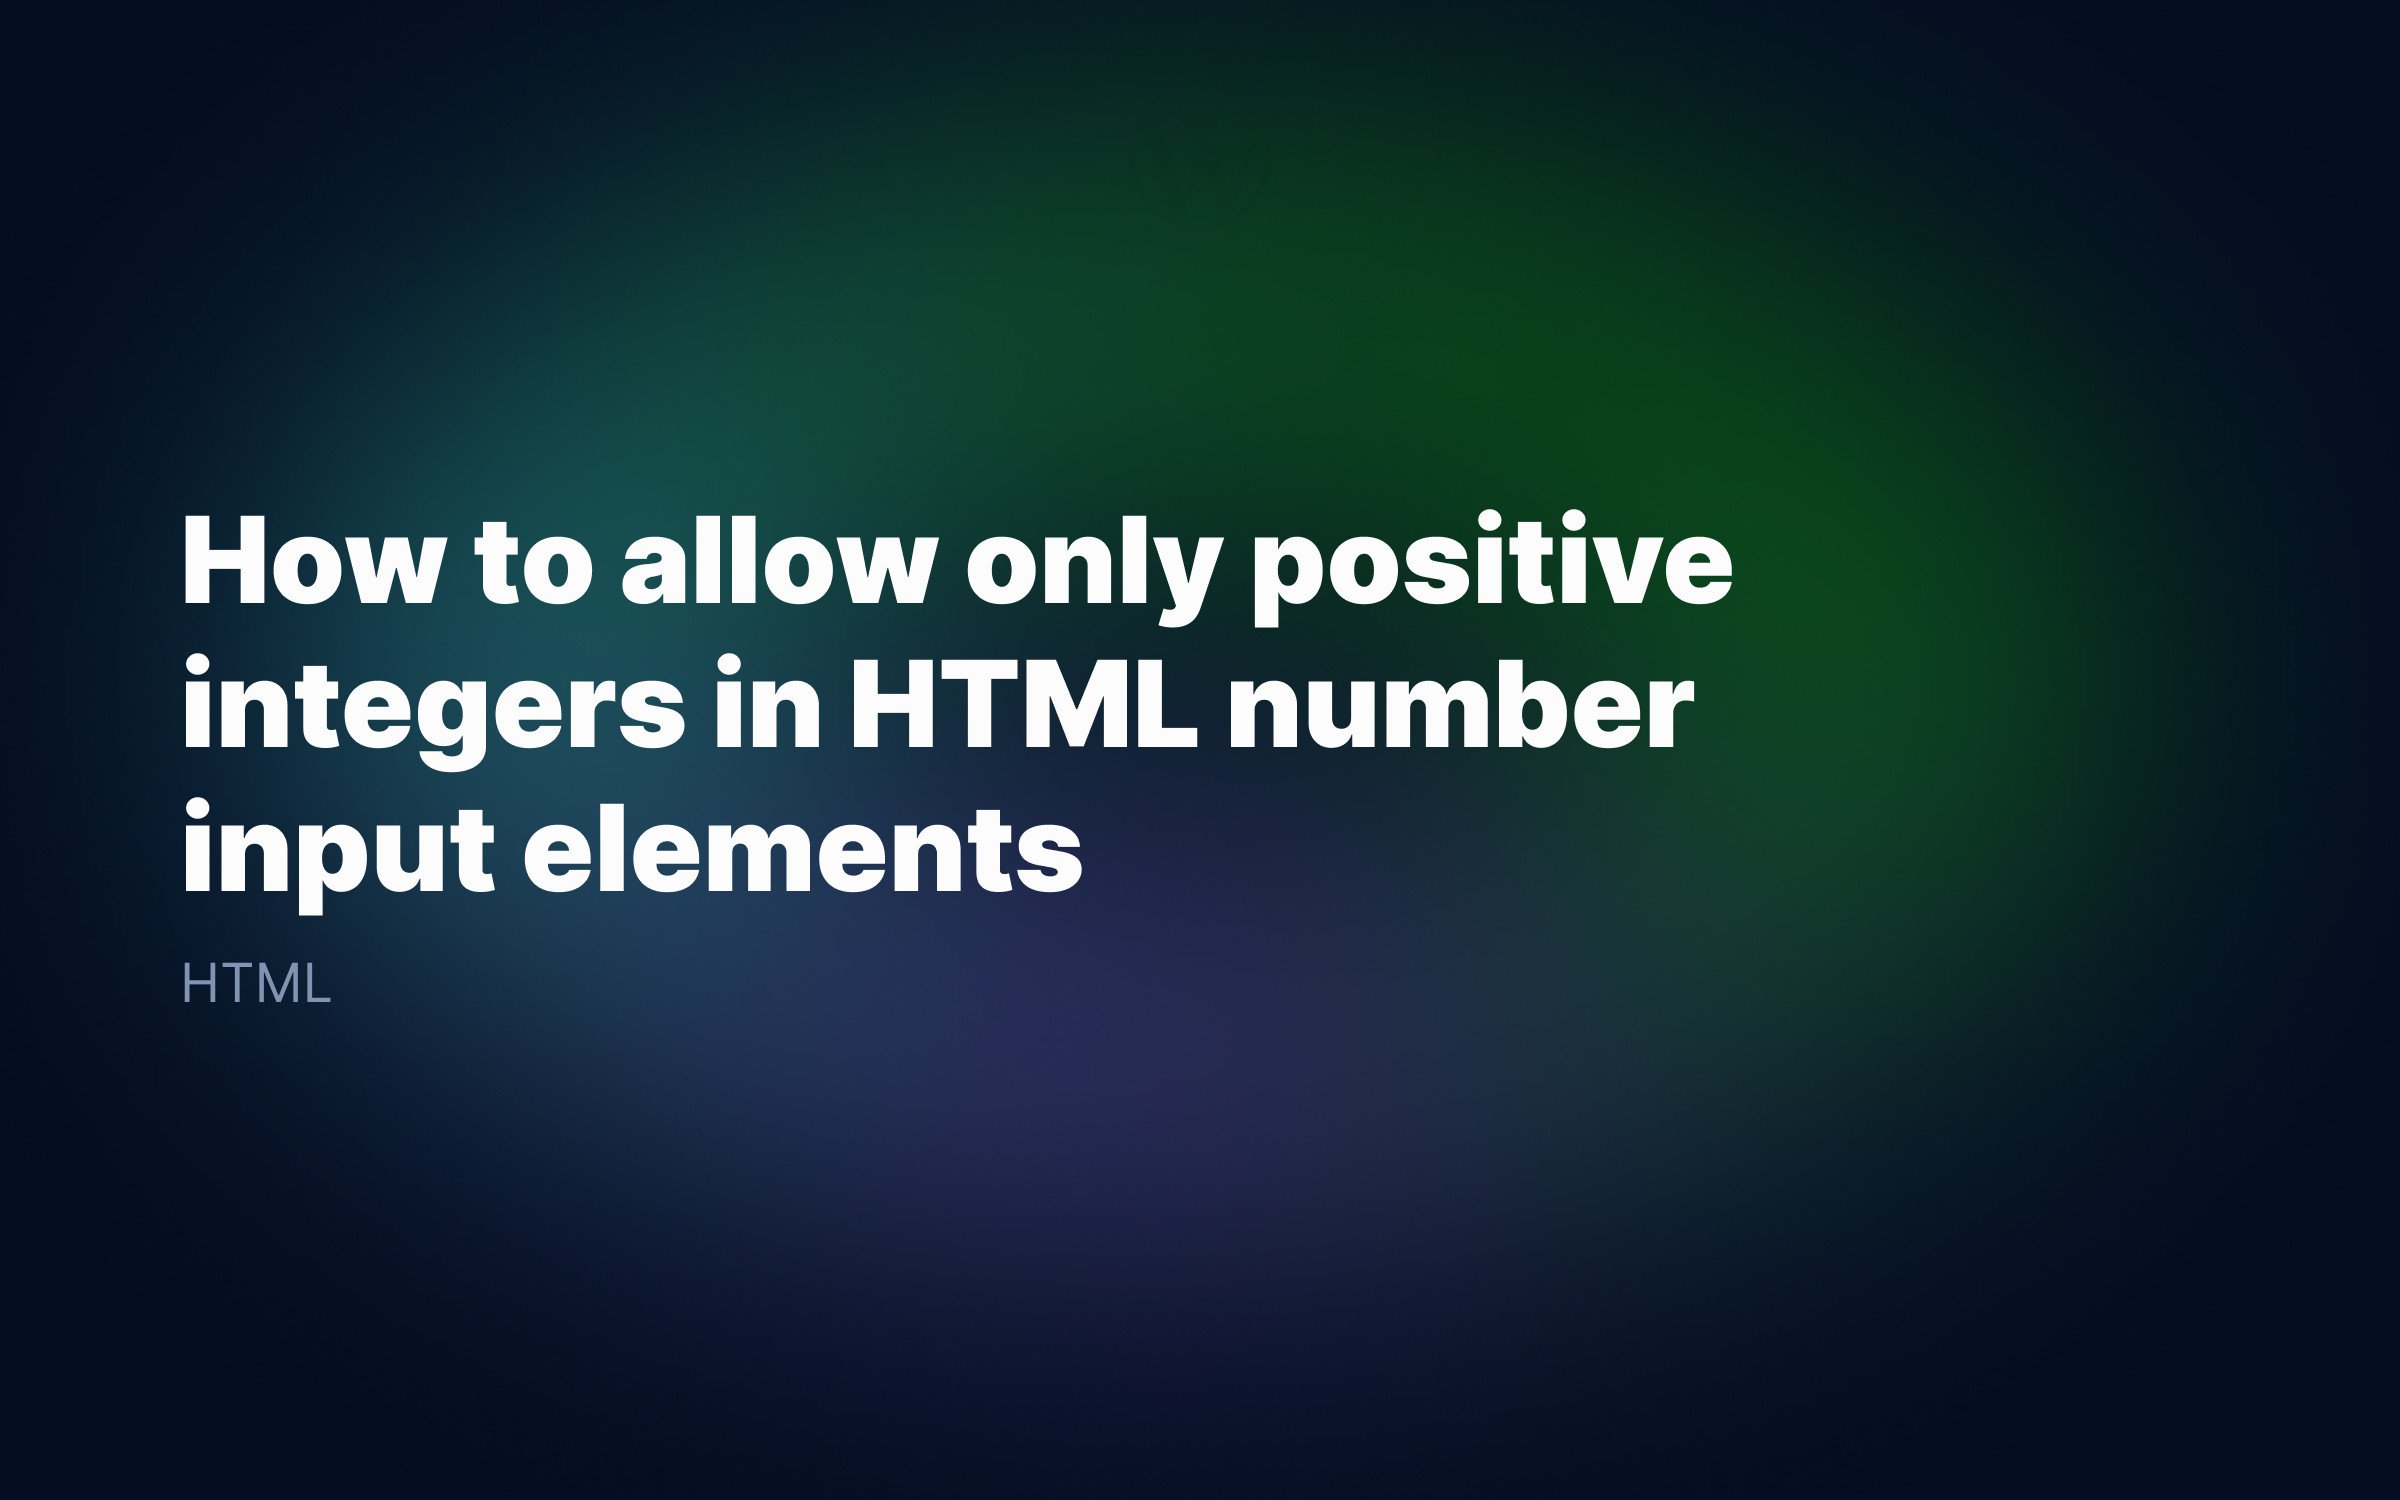 How to allow only positive integers in HTML number input elements